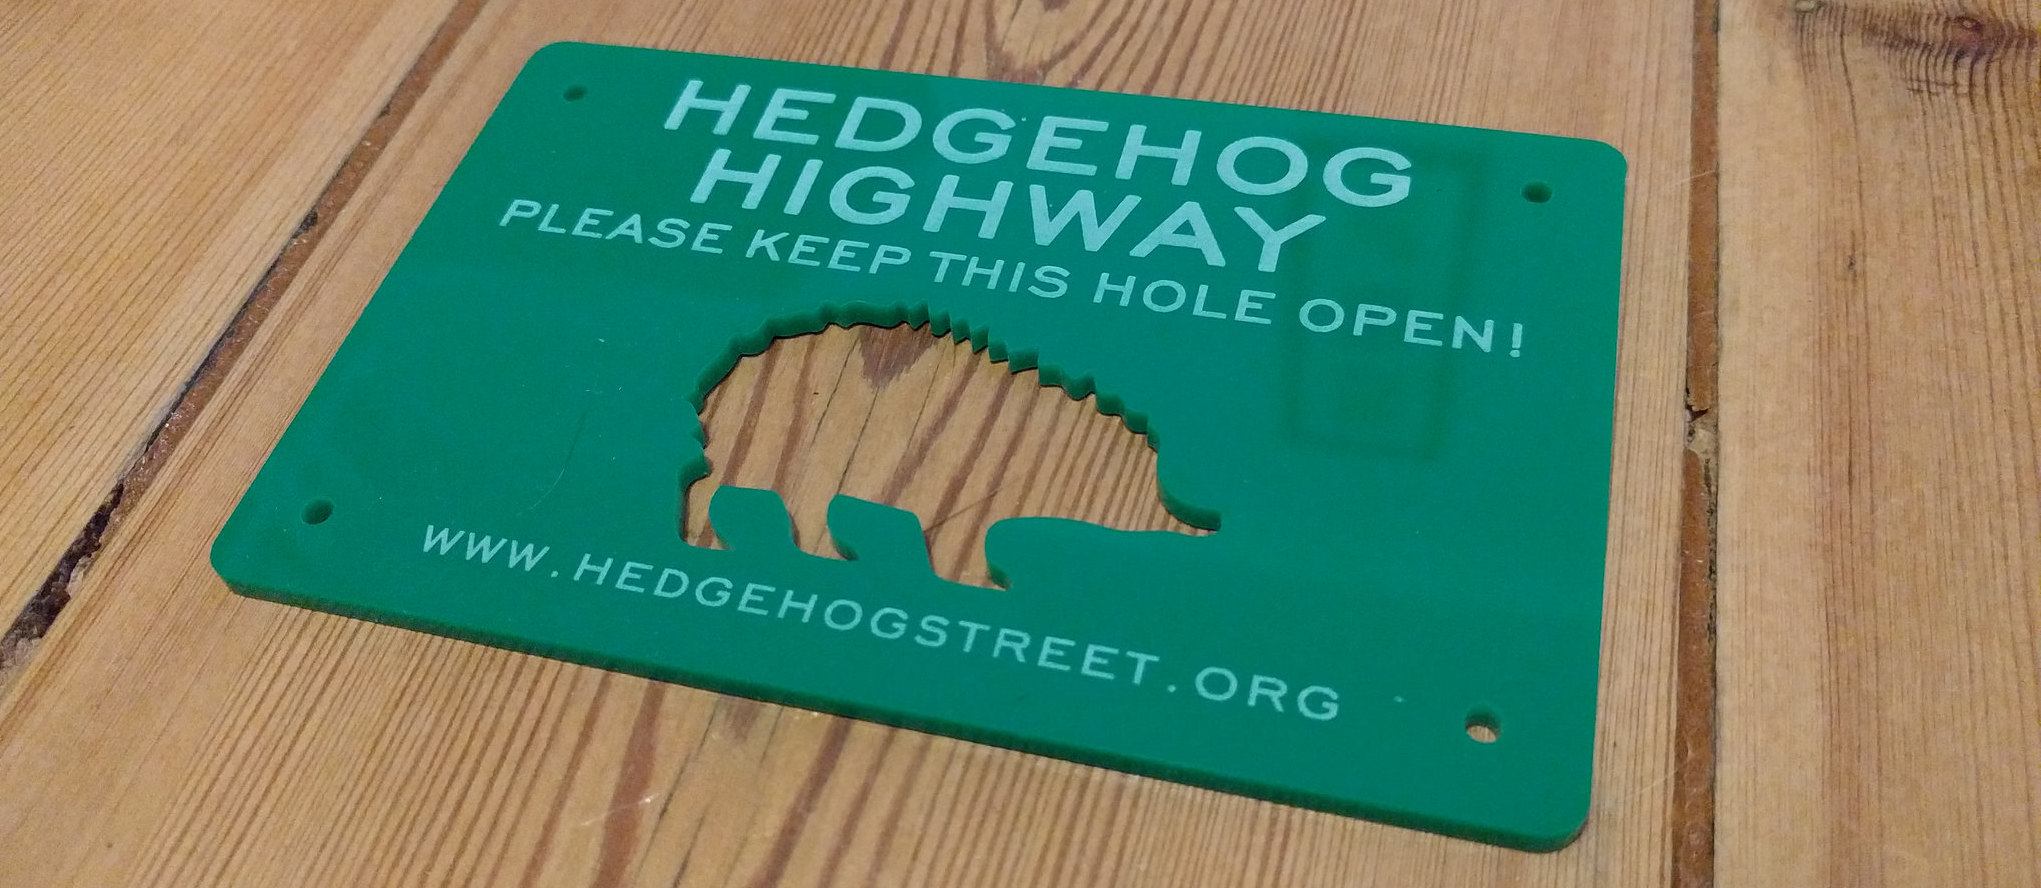 A hedgehog sign asking not to cover up the hole in the fence